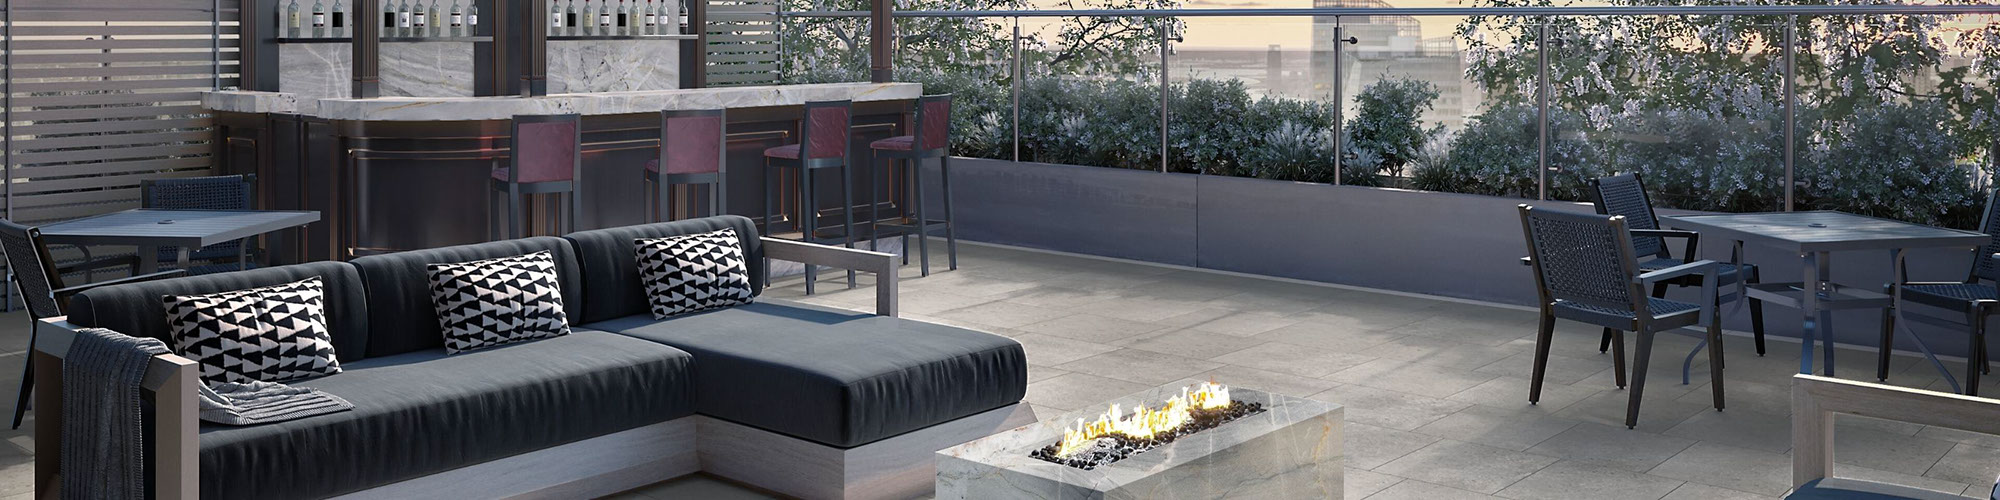 Rooftop bar with gray quartzite slab firepits, countertops, and backsplash, gray floor tile that looks like stone, black sectionals with chaise lounges.